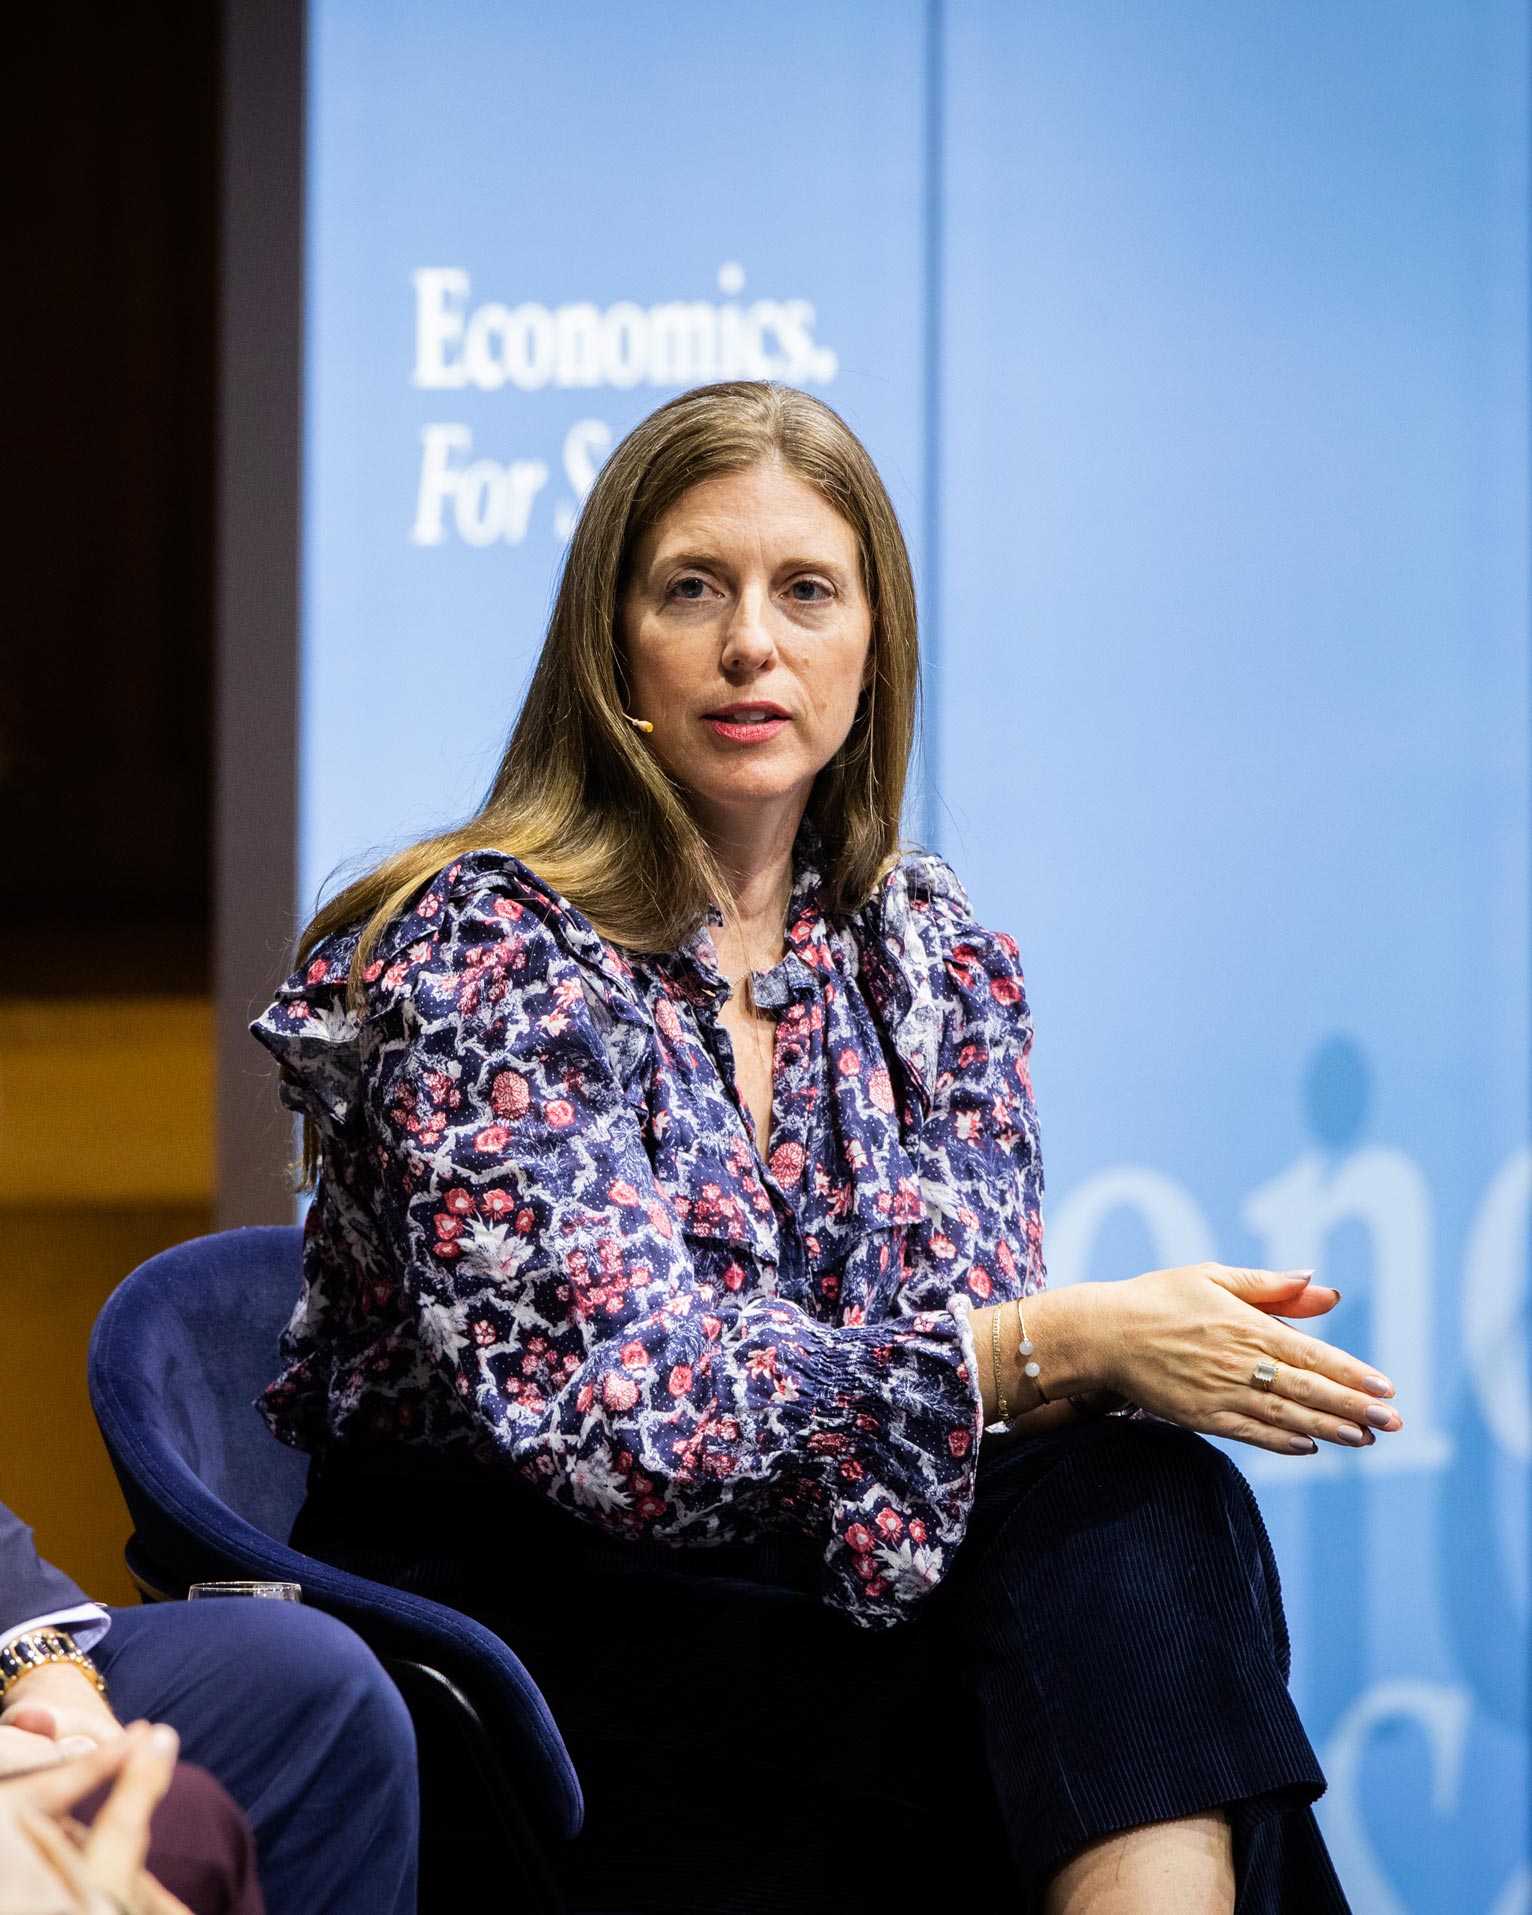 Hélène Landemore is a professor of political theory at Yale University and a Distinguished Researcher at the Oxford University Institute for Ethics in AI. At Yale she is also a leader of the Institution for Social and Policy Studies (ISPS)'s Democratic Innovations program. She is the author of Democratic Reason (Princeton University Press 2013, Spitz Prize 2015), Open Democracy (Princeton University Press 2020), and Debating Democracy (Oxford University Press 2021, with Jason Brennan) as well as various edited volumes and articles in democratic theory. She has served as governance board member of the French Citizens' Convention on end-of-life issues from October 2022 to April 2023 and is a strategic advisor to the non-profit organization DemocracyNext.